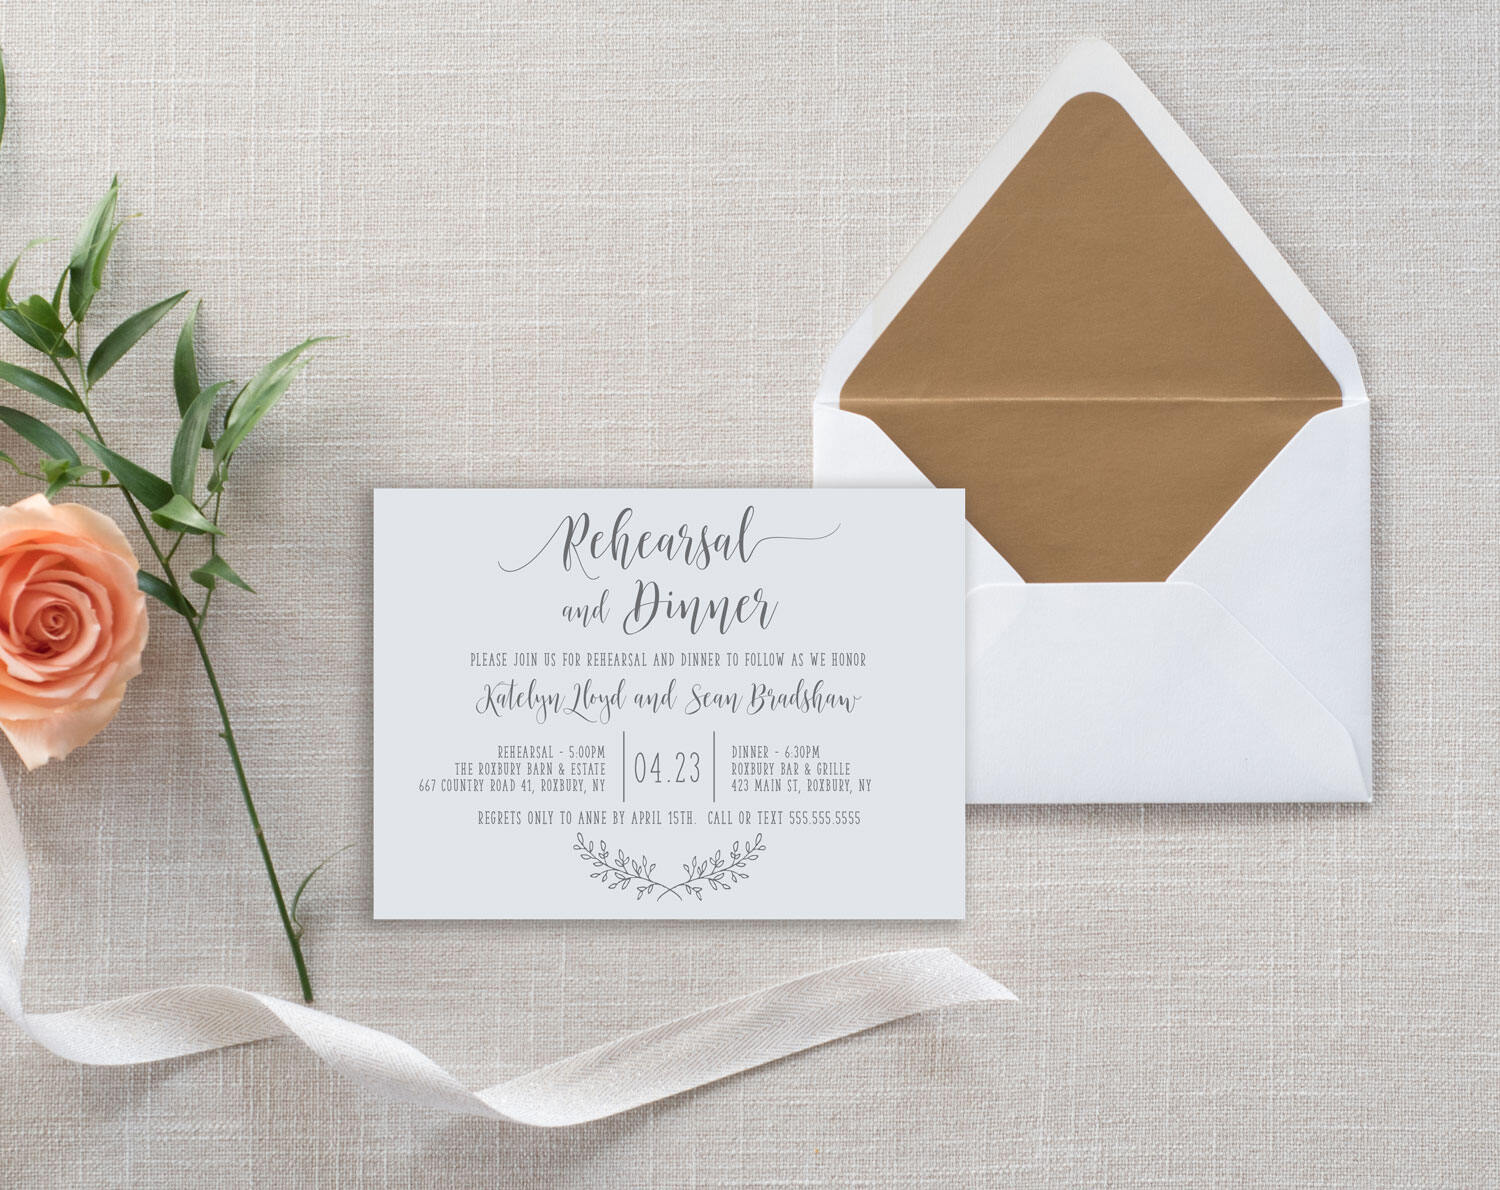 How To Write Hosting Details On A Rehearsal Dinner Invitation